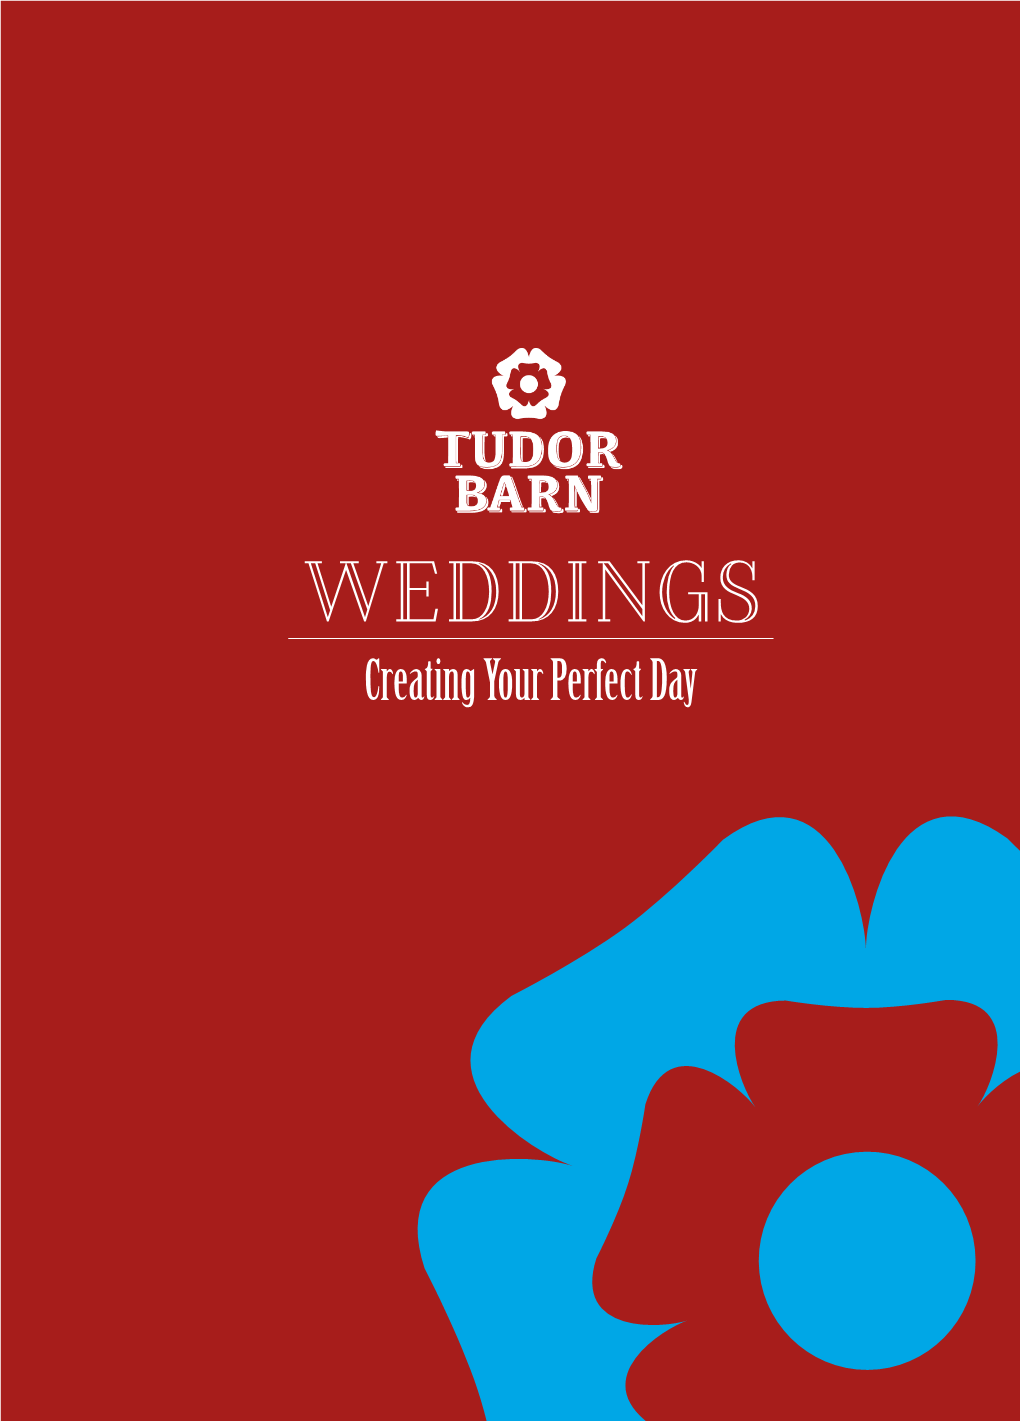 WEDDINGS Creating Your Perfect Day “